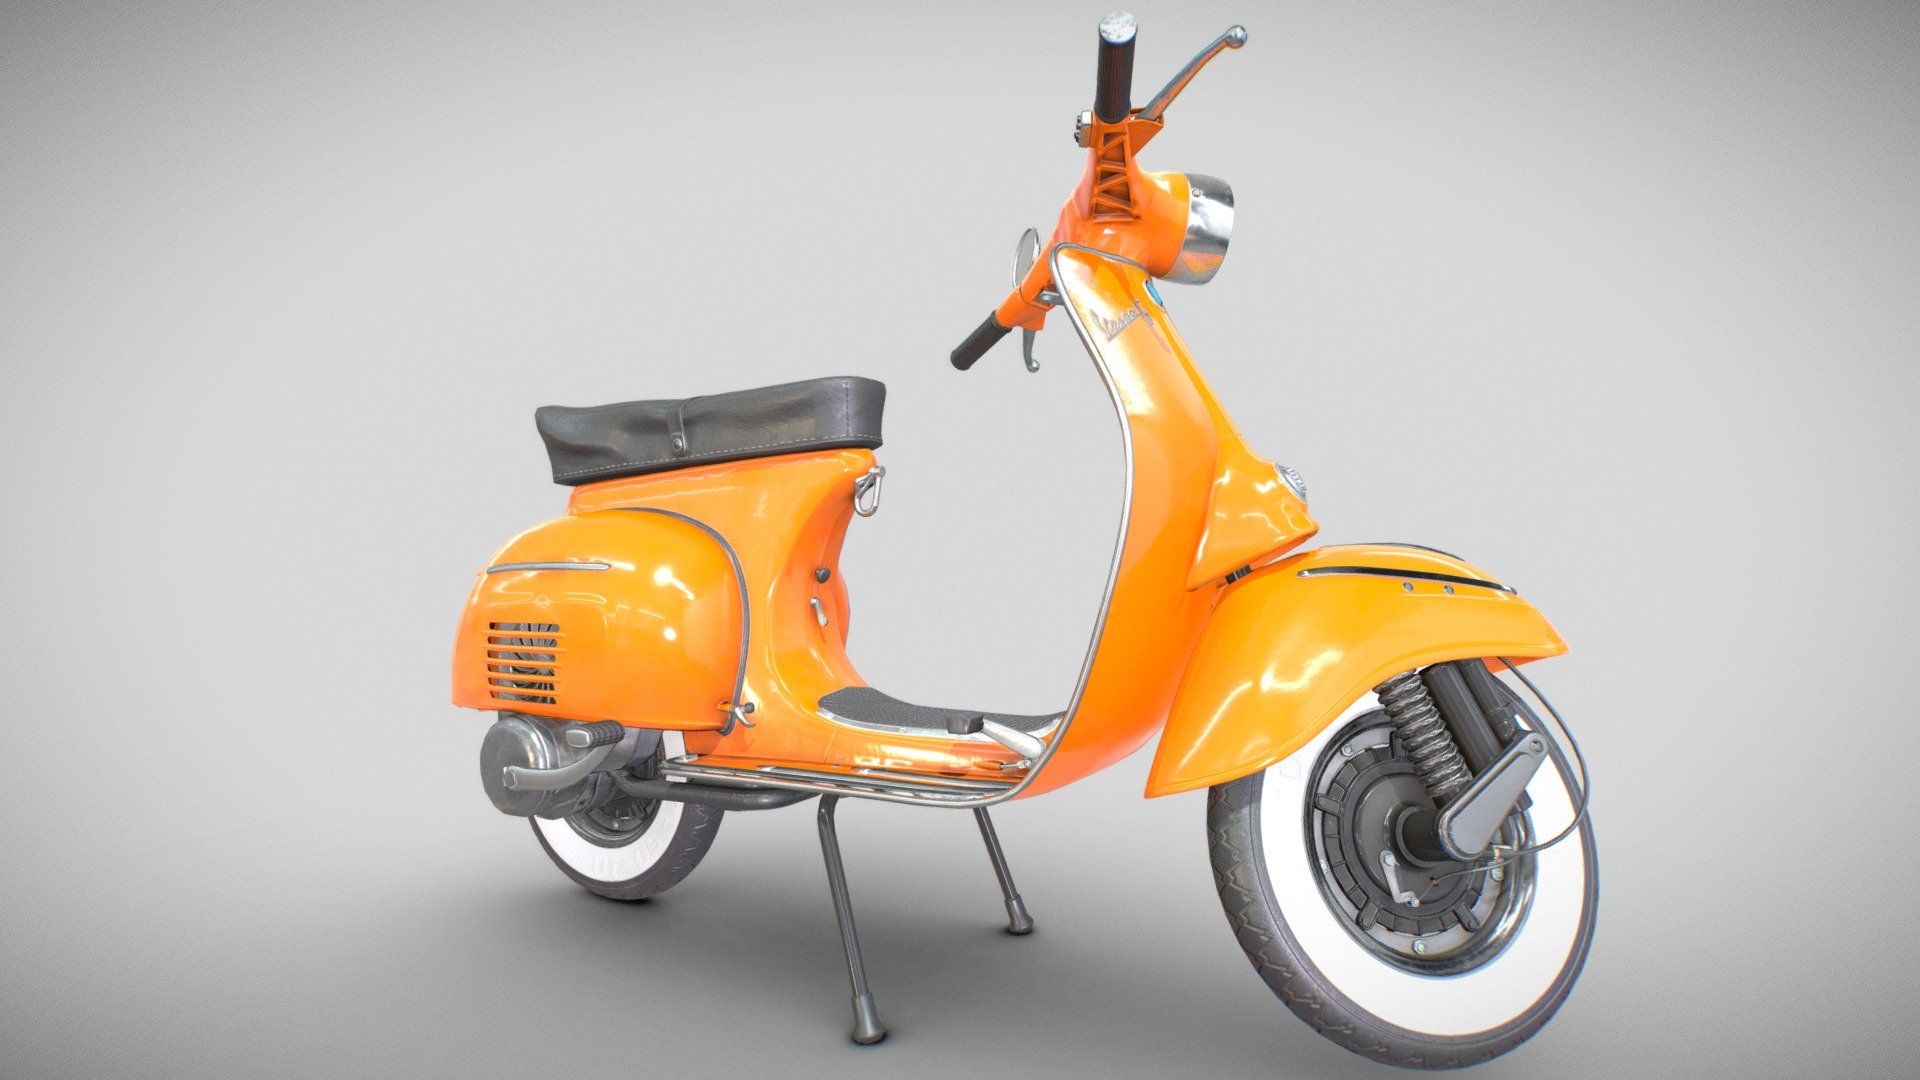 The Vespa 125 GT was a motor scooter from the manufacturer Piaggio, which sells its classic product line under the brand name Vespa.
The Vespa 125 GT presented in 1966, the GT stands for Gran Turismo, is the successor to the Vespa 125 Super (VNC). It also receives the engine from this, but otherwise builds on the frame of the Vespa 150 Sprint. By increasing the compression, it now has 6.27 hp.

Visually, the Vespa 125 GTR hardly differs from the Vespa 125 GT, but in contrast to this it has a double seat bench. Only on the leg shield there is a small &ldquo;R